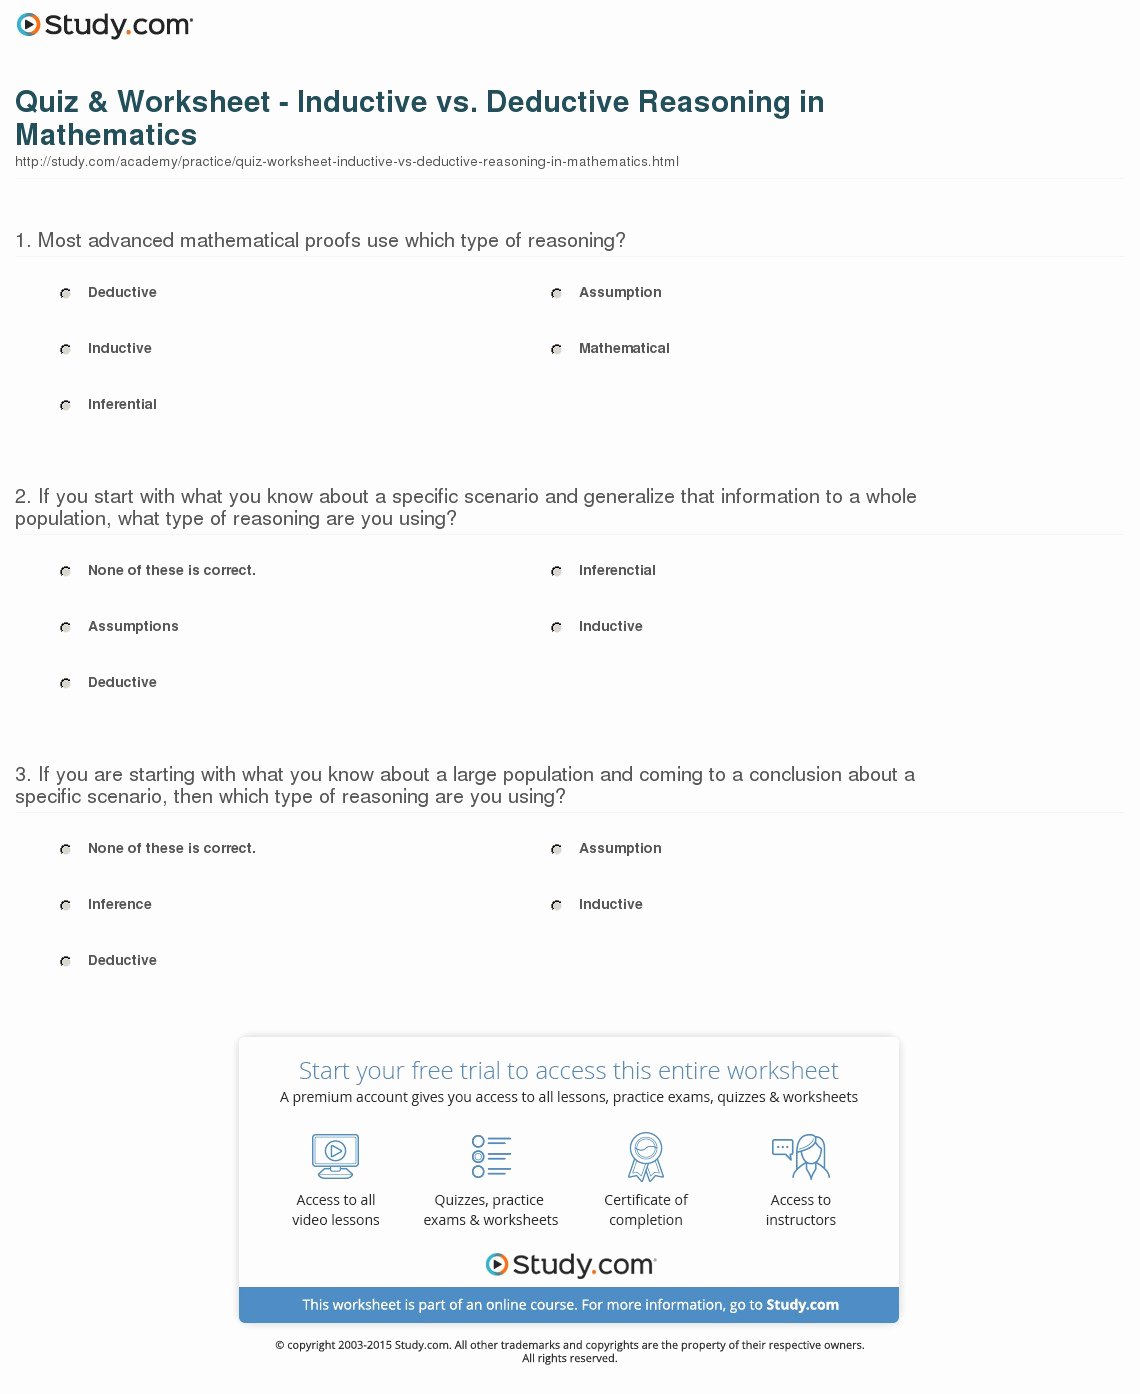 Inductive and Deductive Reasoning Worksheet Best Of Quiz &amp; Worksheet Inductive Vs Deductive Reasoning In